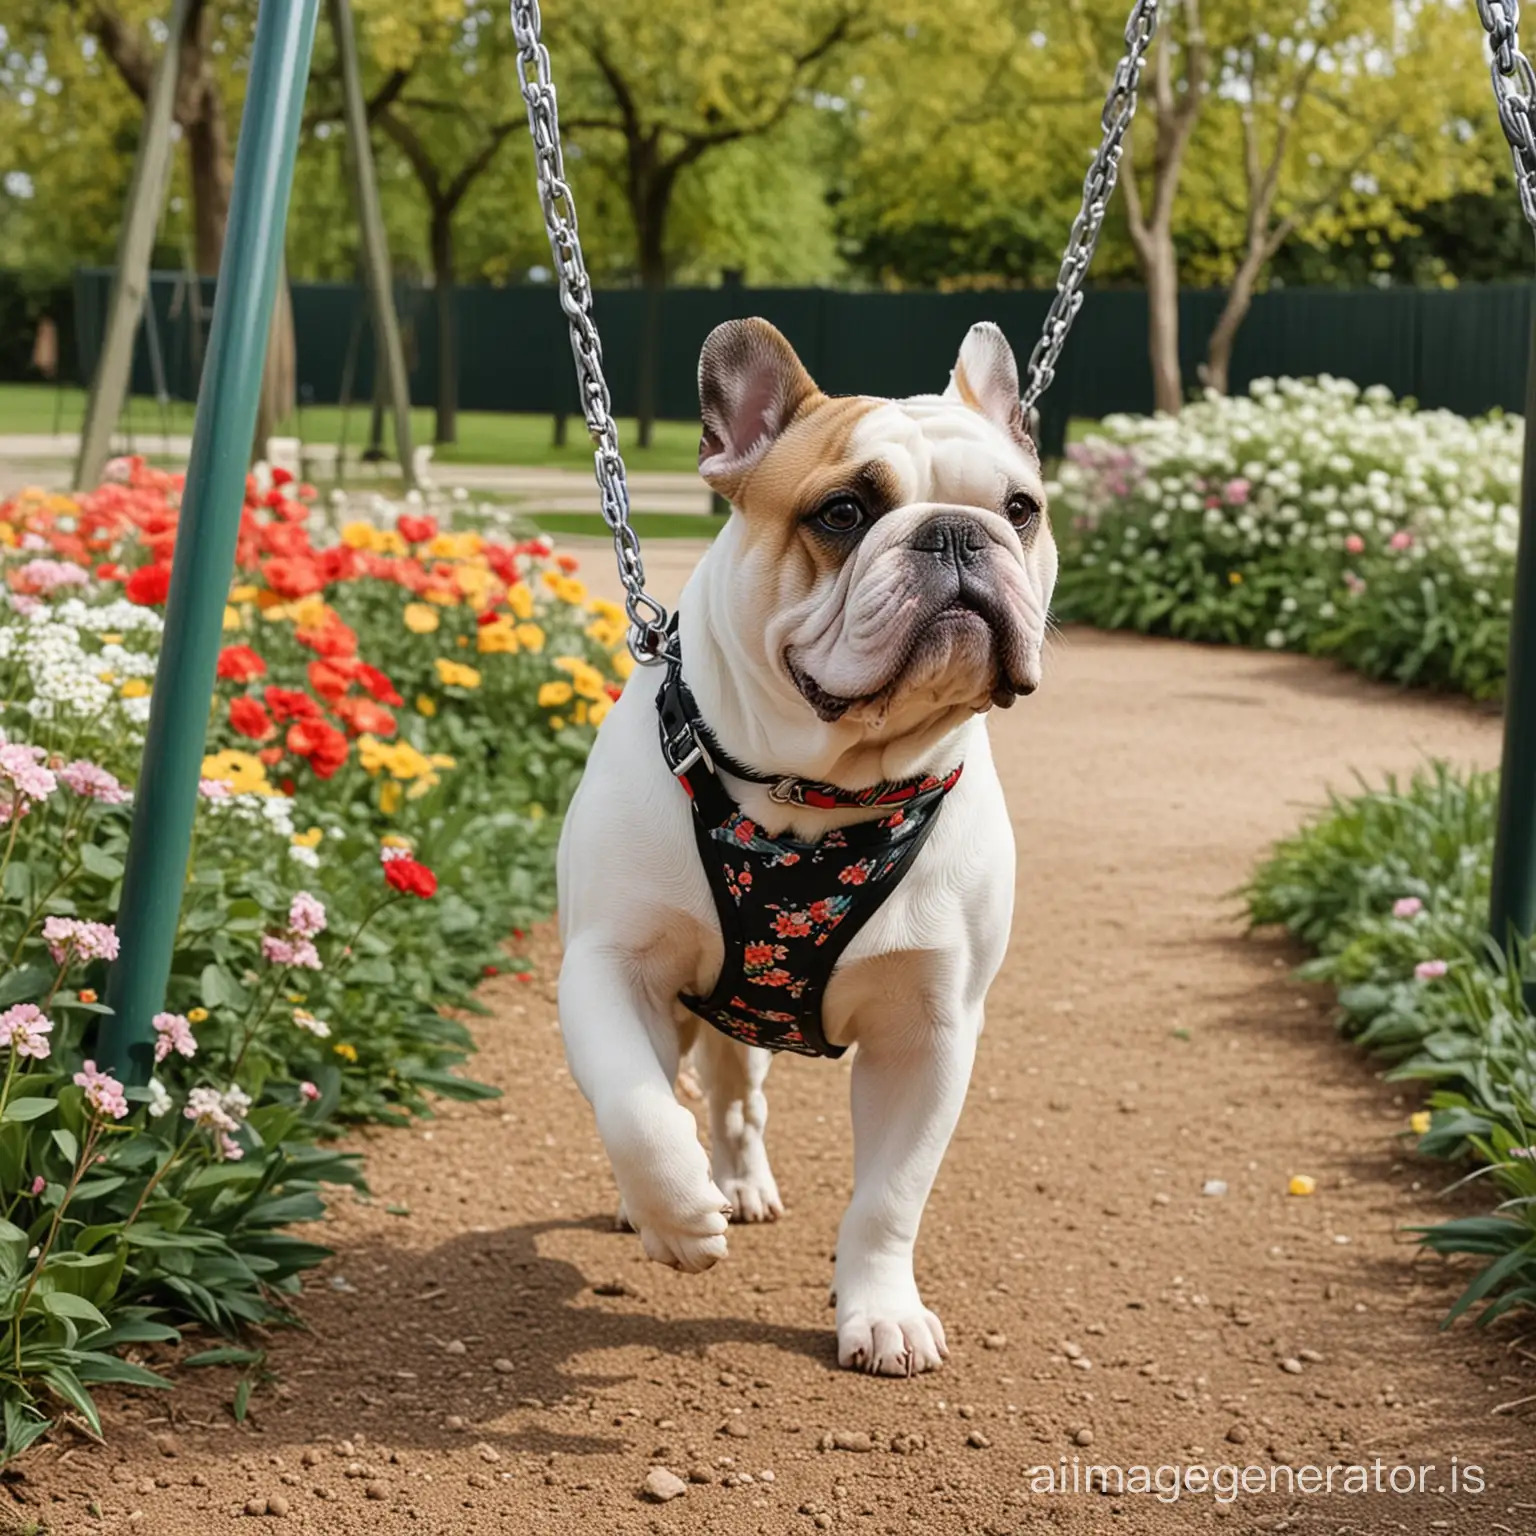 Bulldog on a lead passing through a swing park with flowers